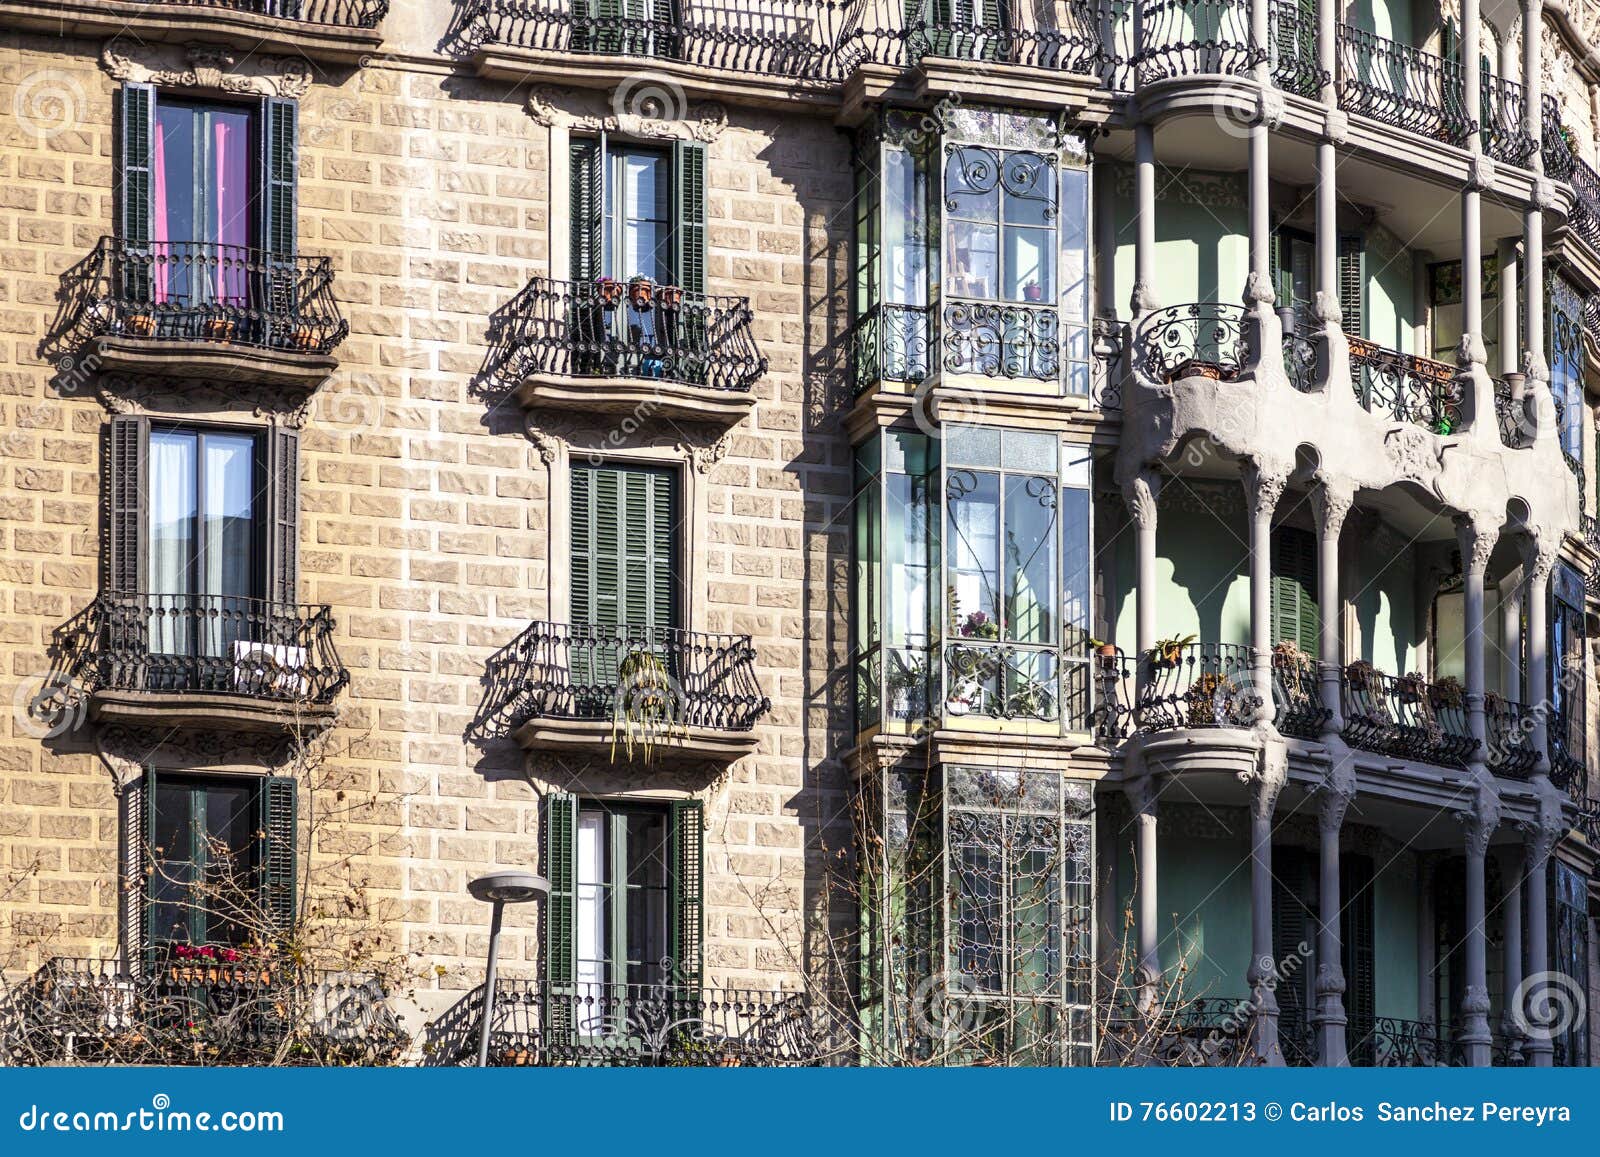 modernism building in eixample district in barcelona